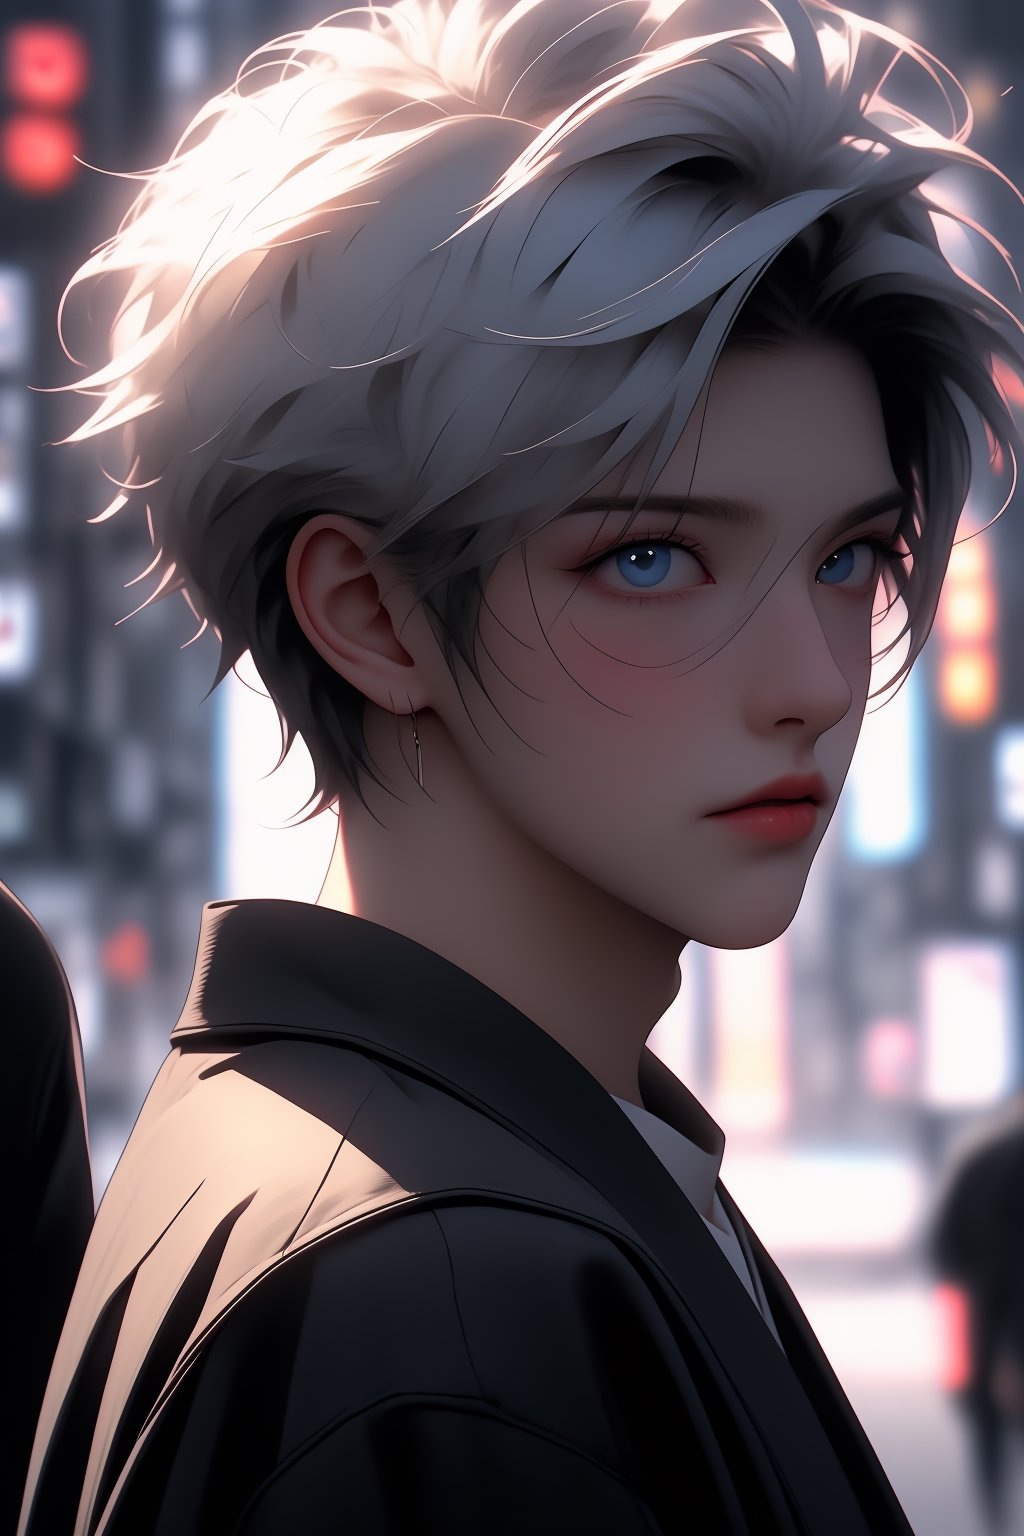 ((Close-up view )),1boy, handsome boy, short hair, sharp hair, white hair, Upper body portrait, anime coloring, cinematic light, Neon Theme, tokyo background, Best quality, masterpiece, Add more details, HD,8K,midjourney, semirealistic, SHIRT,Niji,